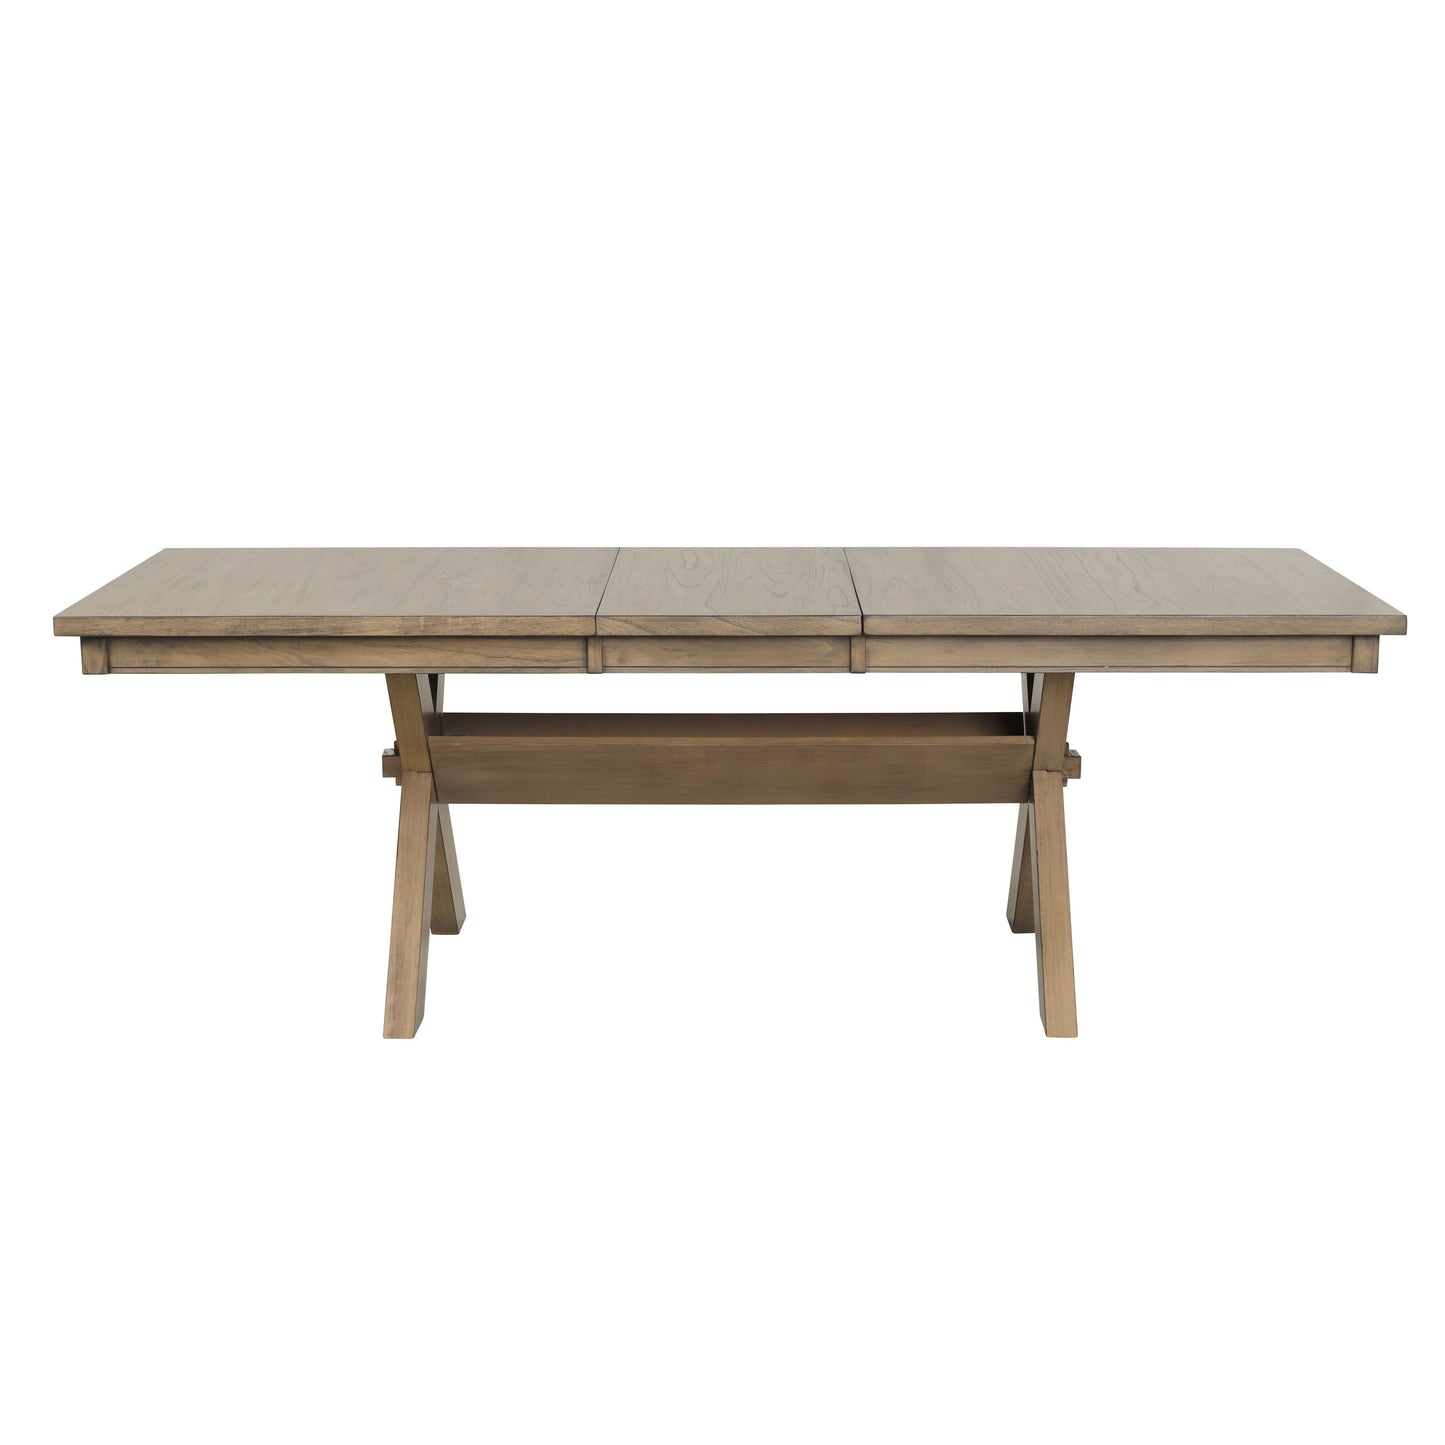 Raven Wood Trestle Extendable Dining Table with Leaf, Glazed Pine Brown